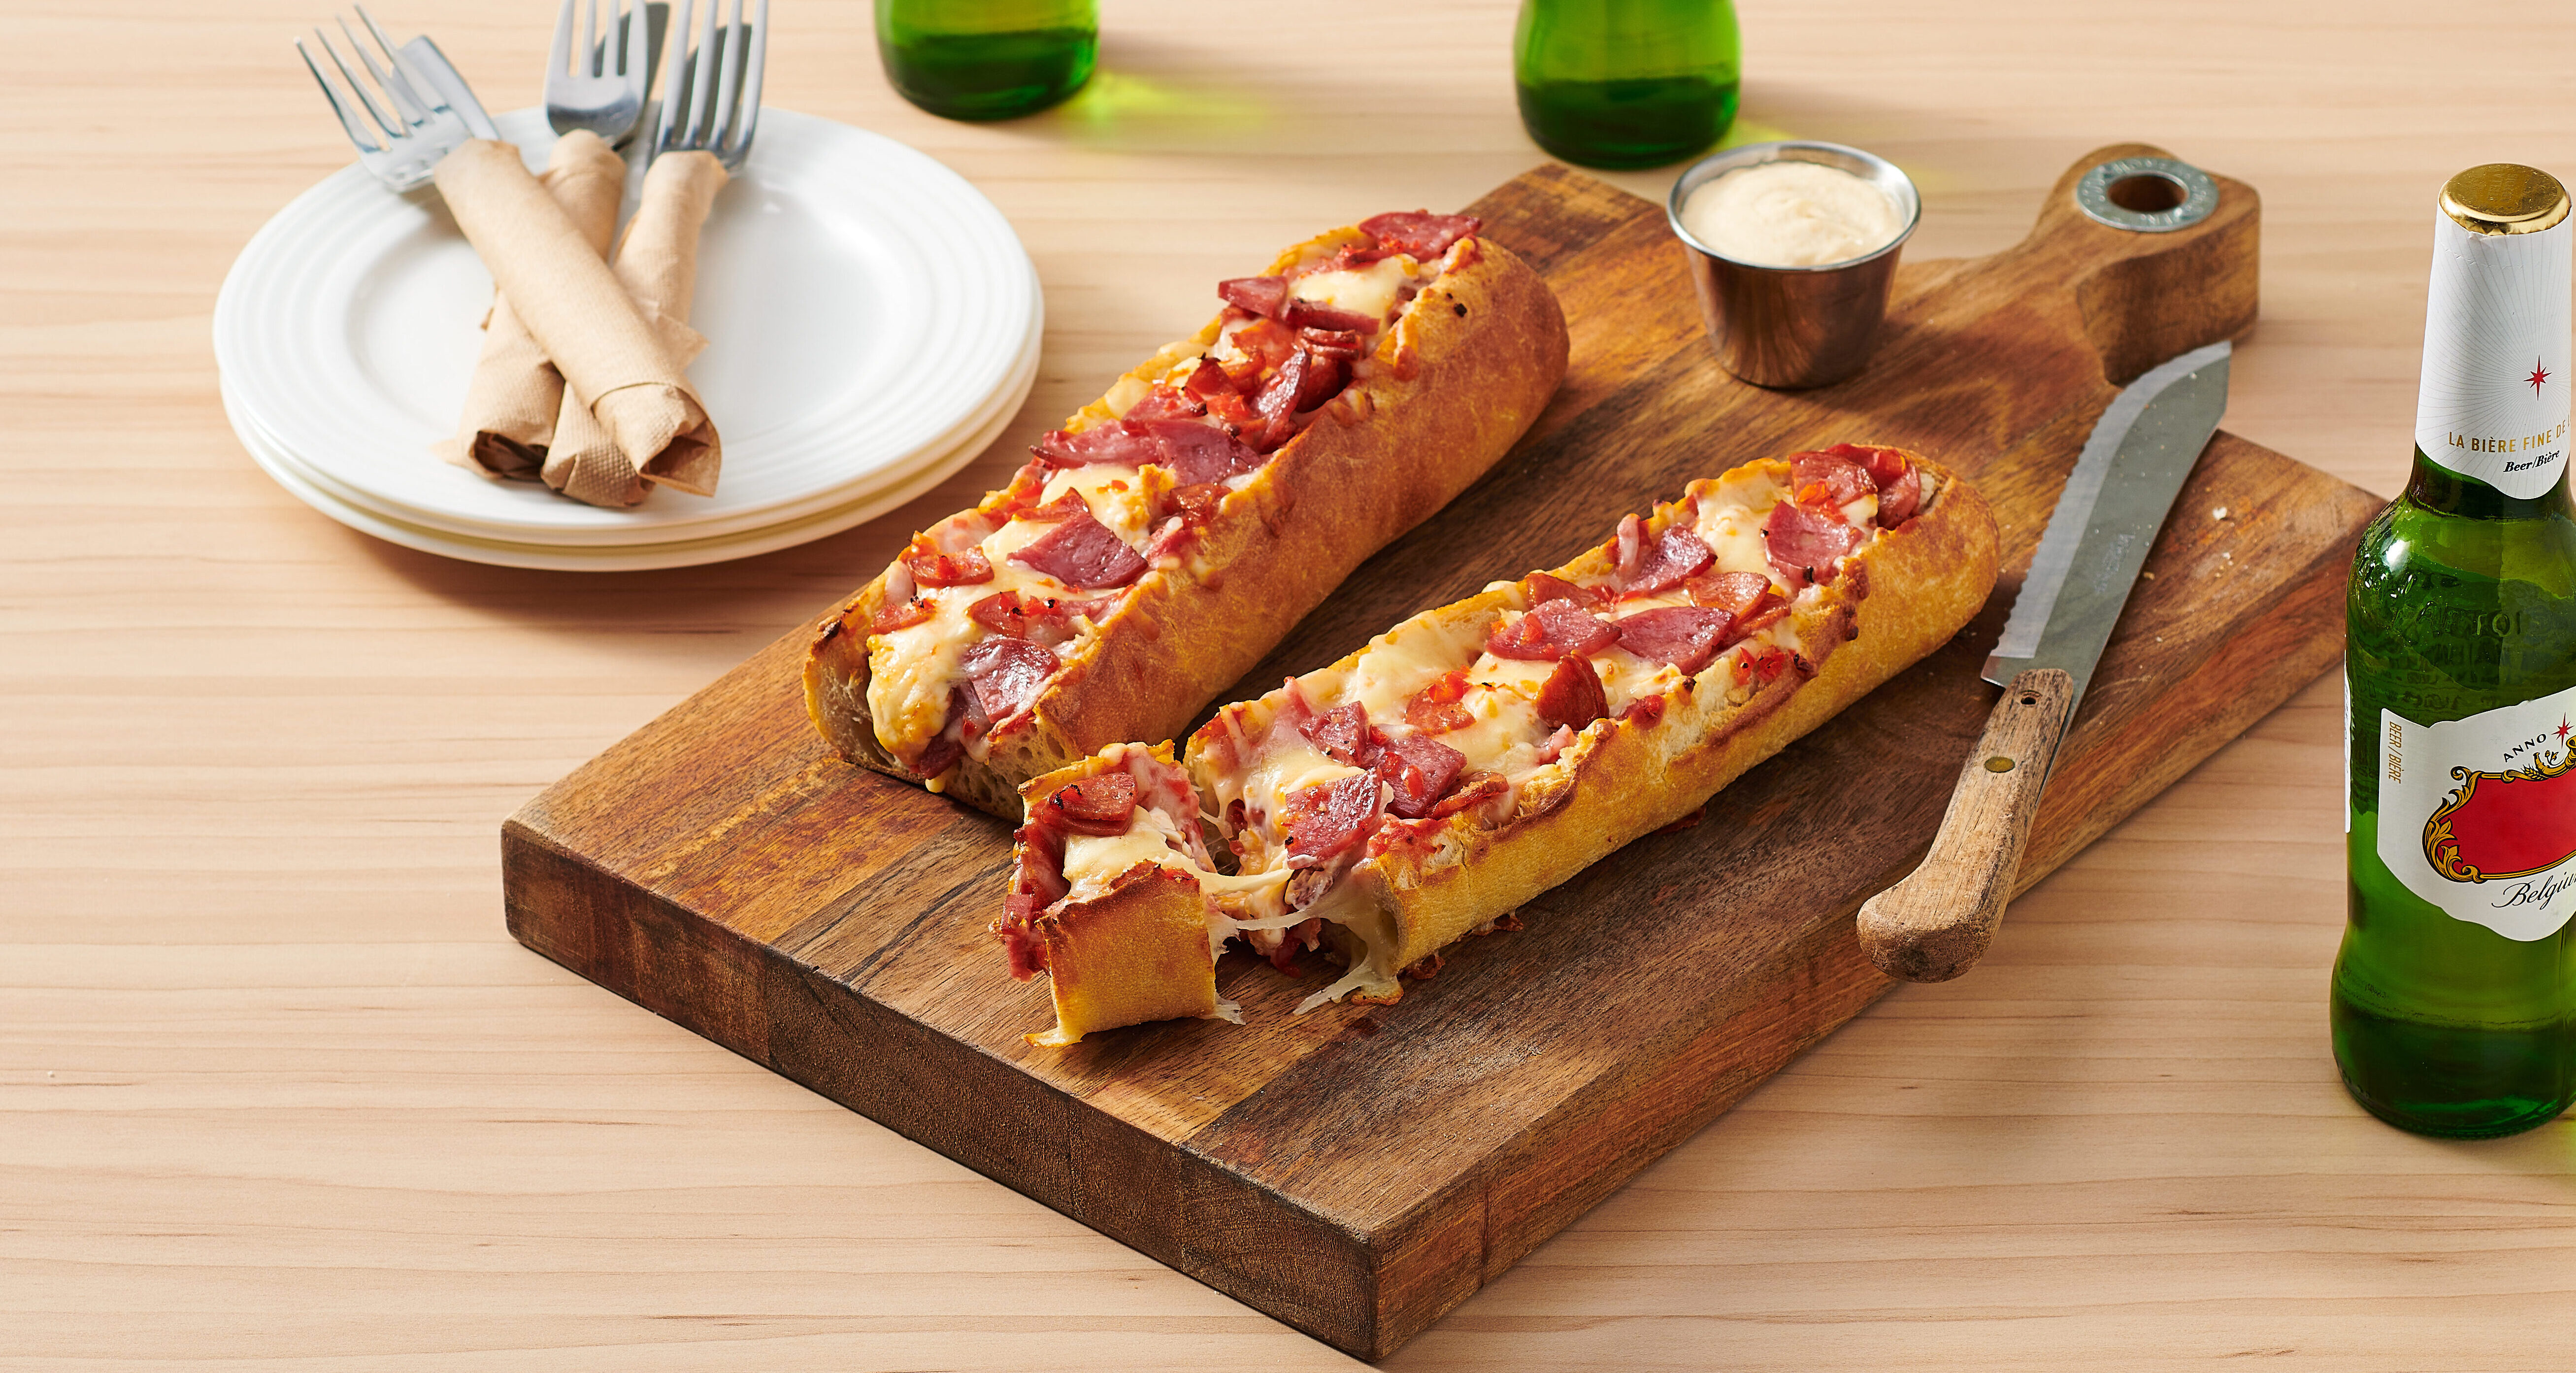 ACE Bakery® Foodservice White Baguette Pizza stuffed with cheese. Set in a restaurant menu inspired setting with a side butter and bottles of beer